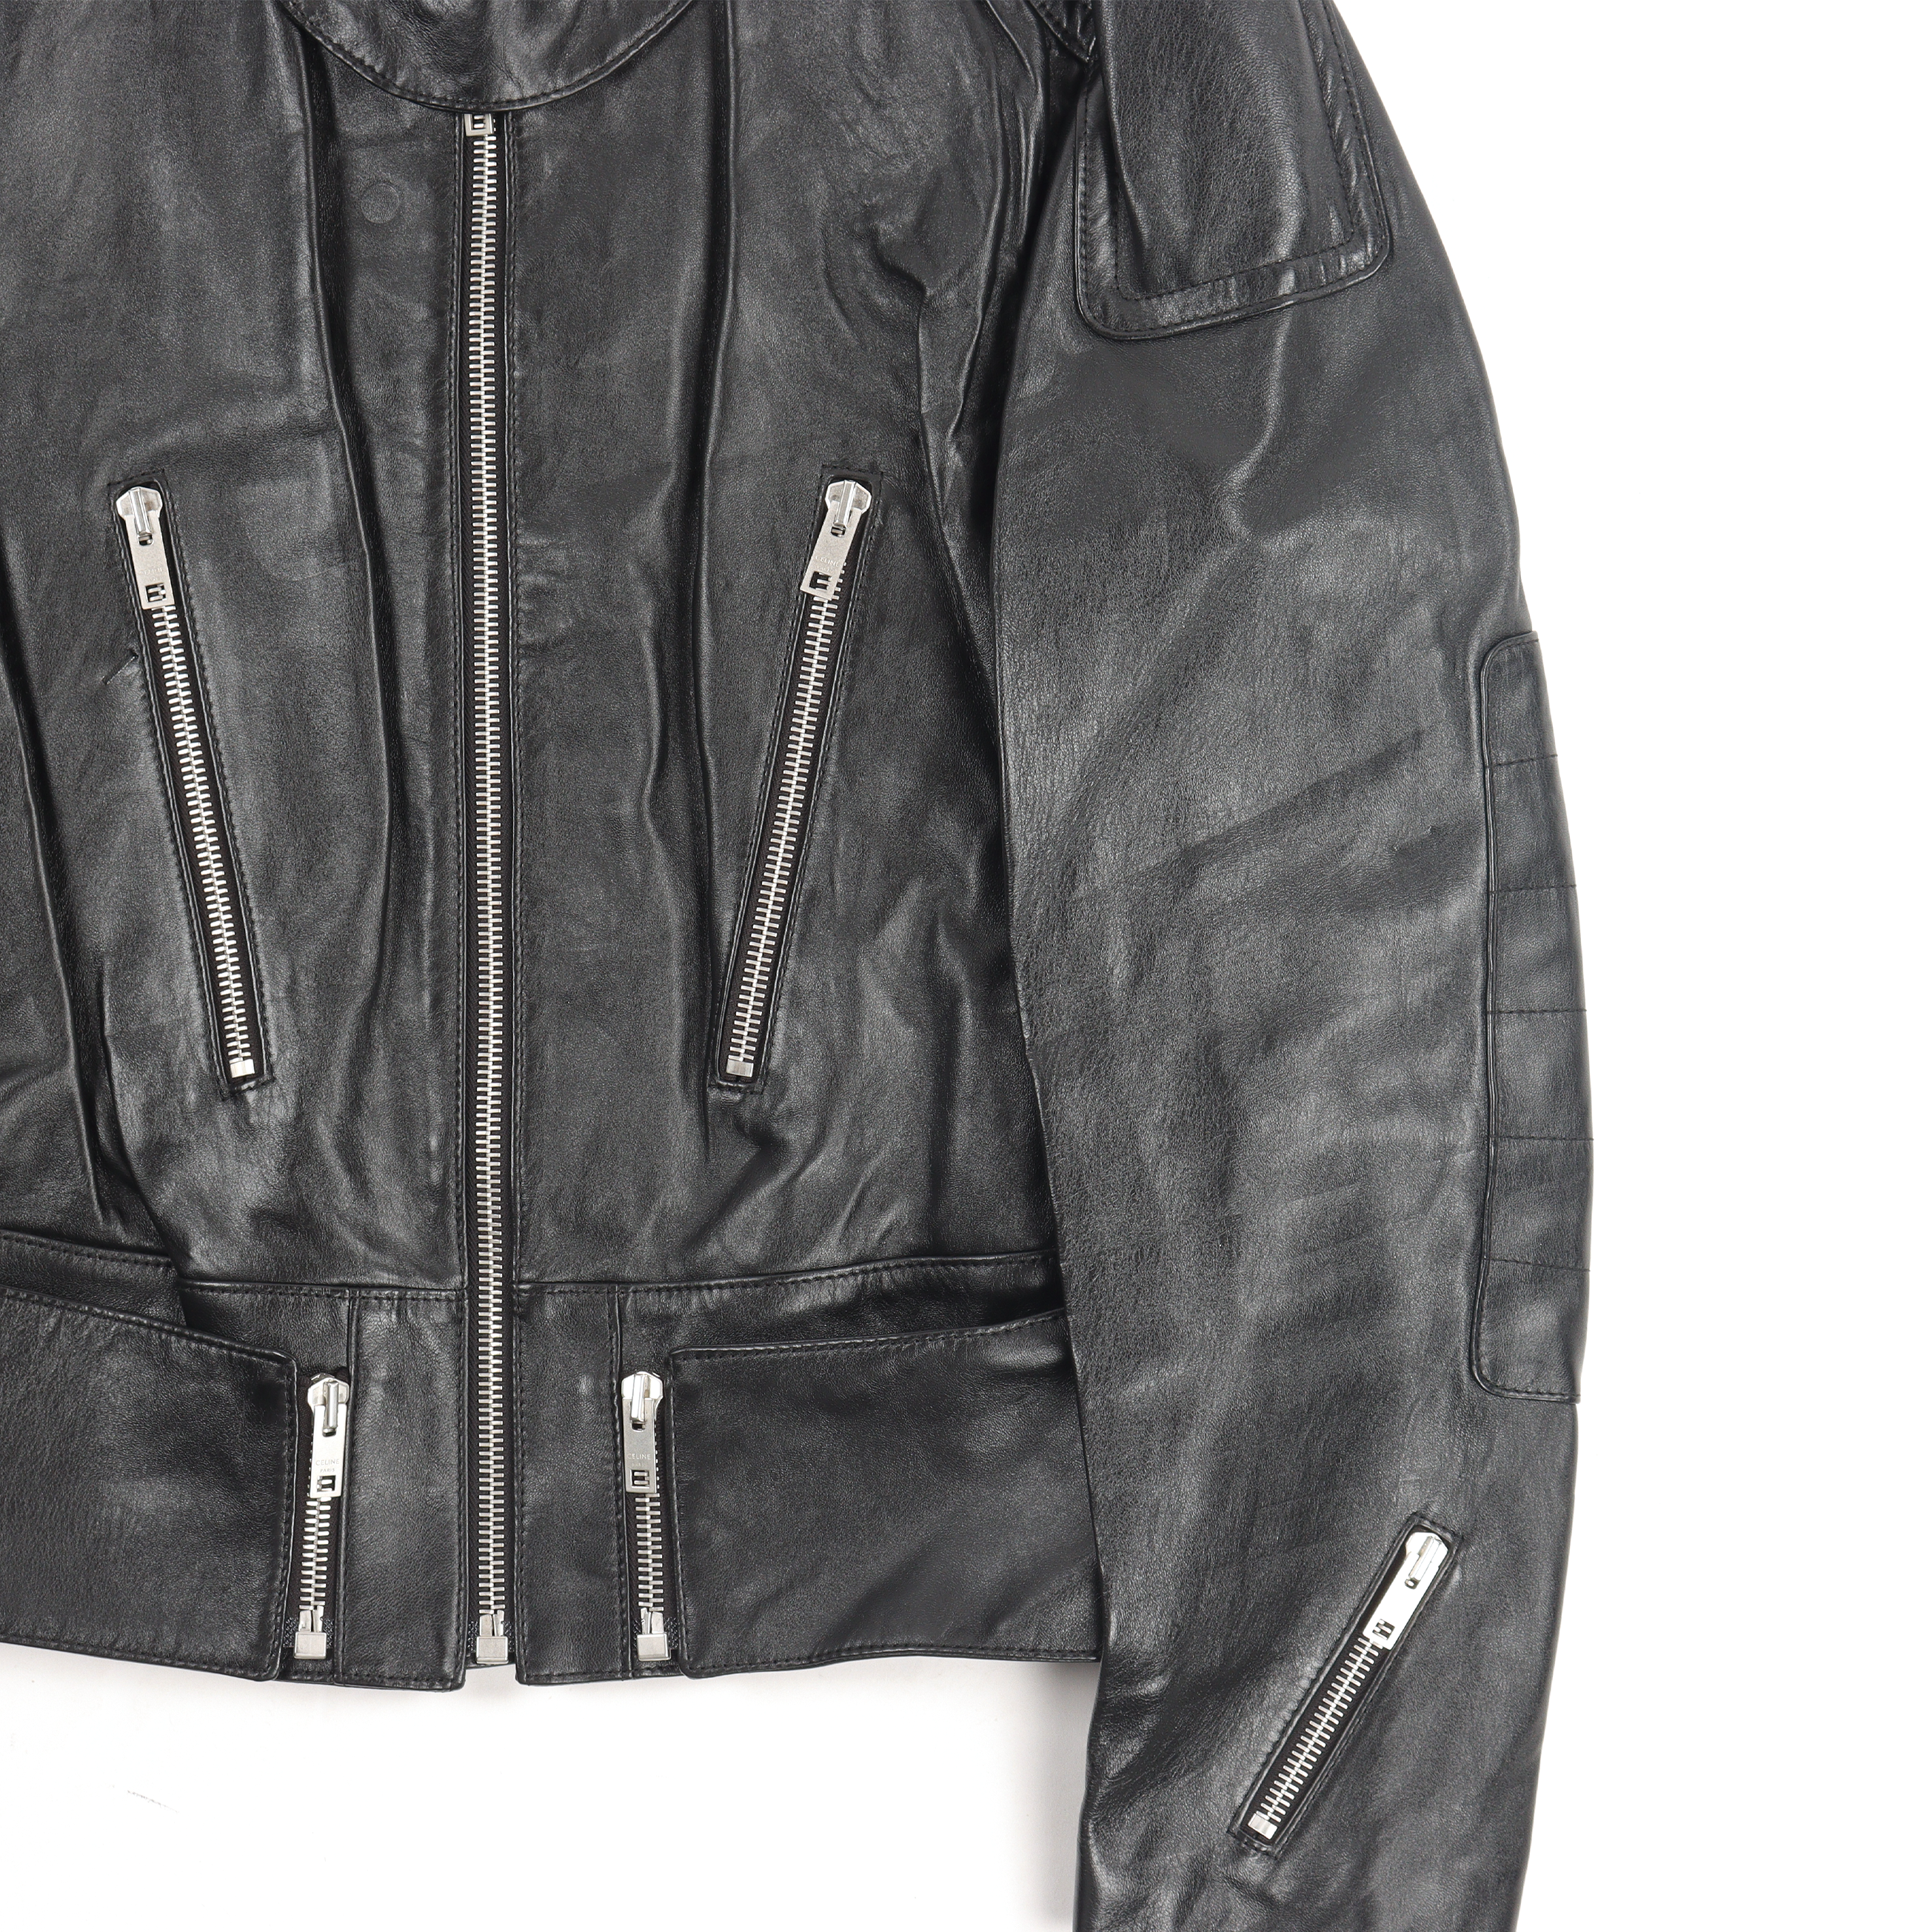 Cafe Racer Padded Leather Jacket w/ Tags